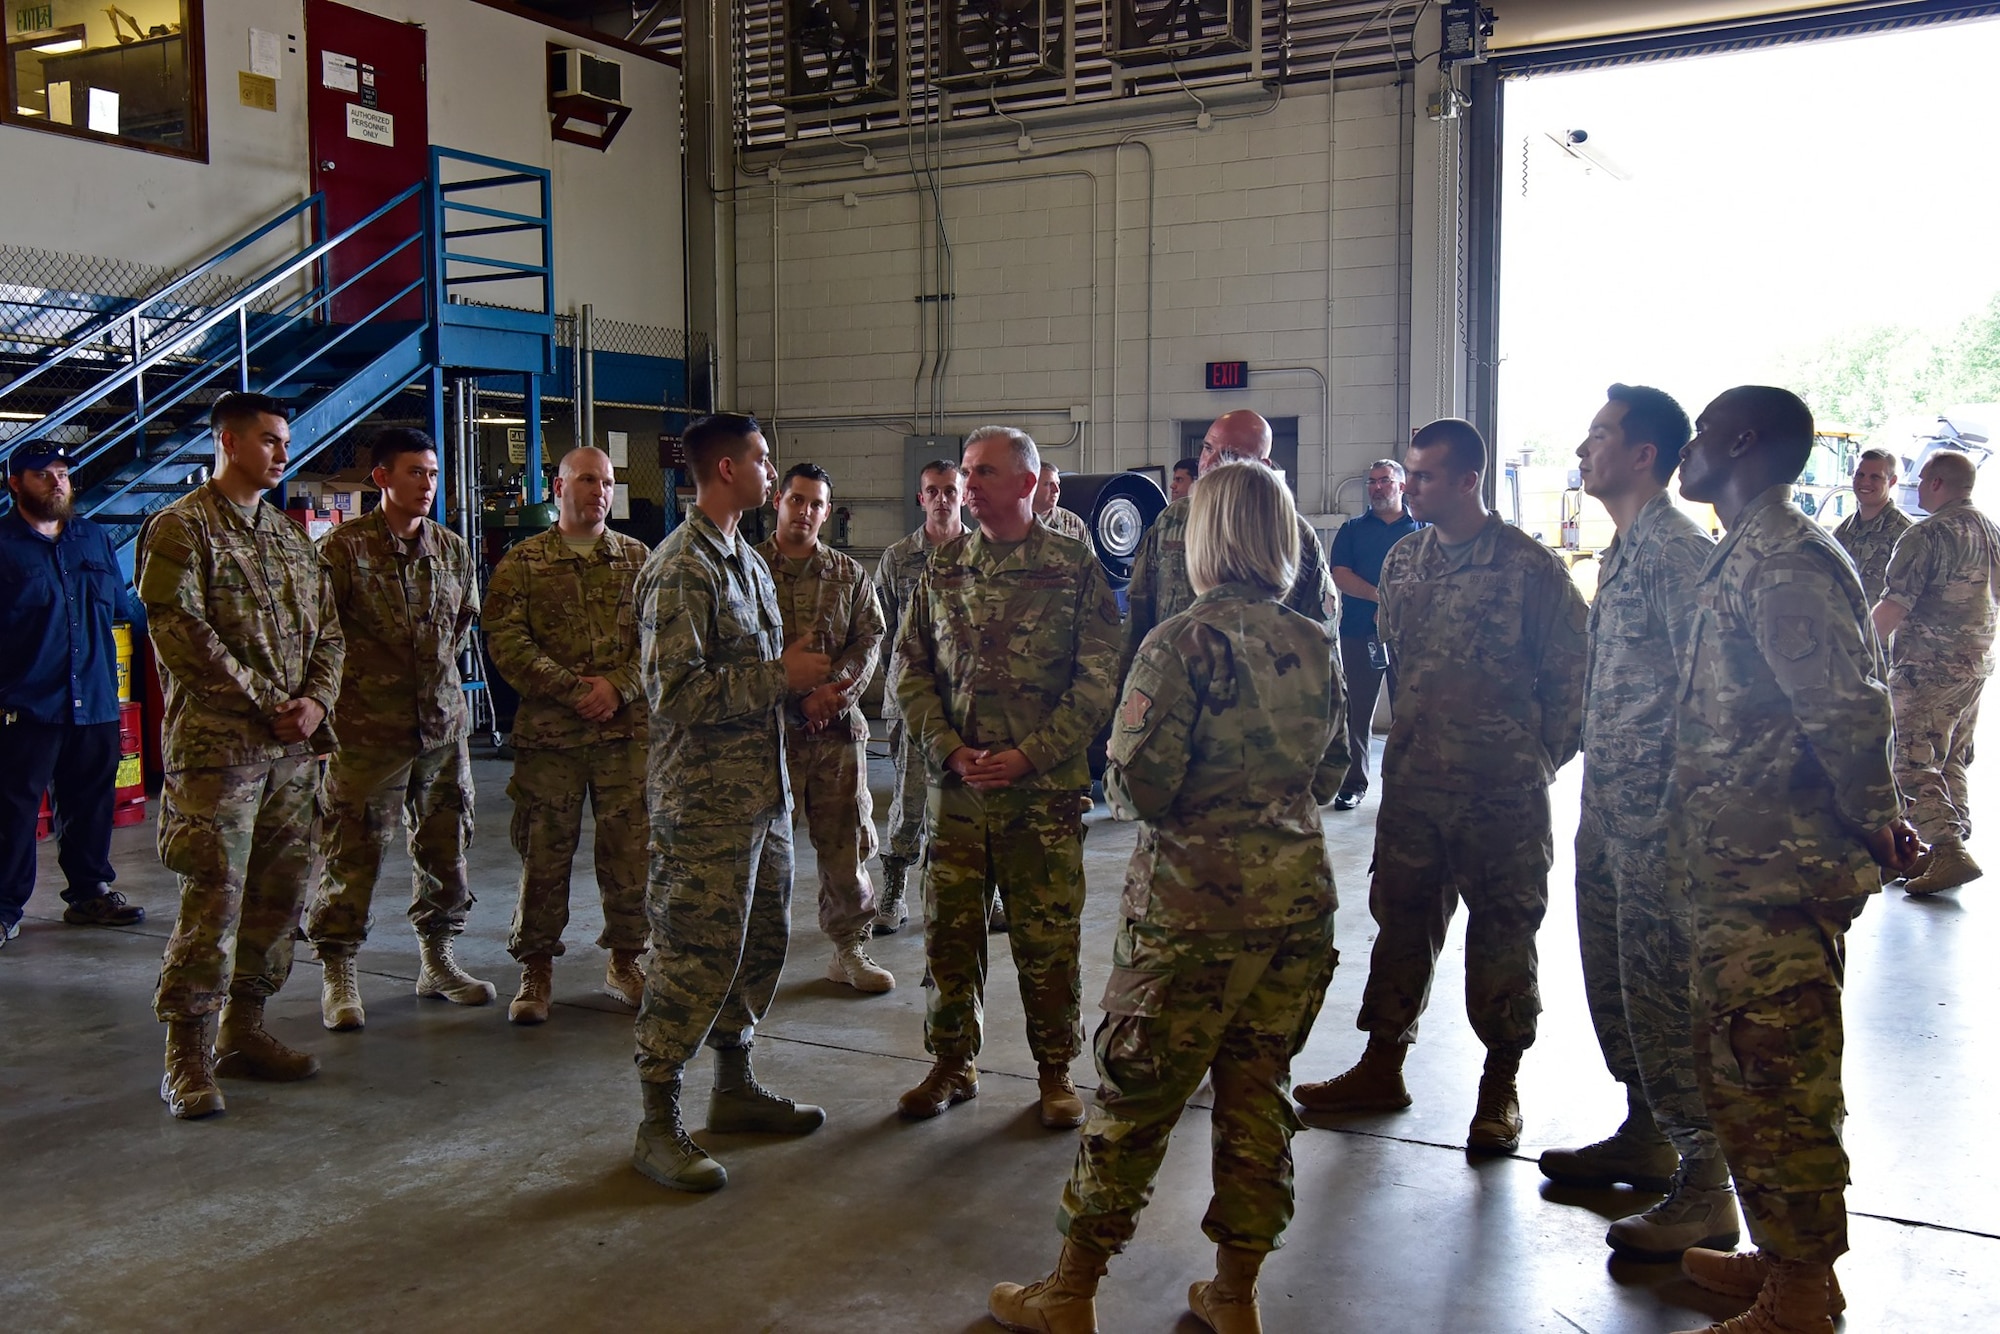 Air Force District of Washington Commander Maj. Gen. Ricky N. Rupp and AFDW Command Chief Master Sgt. Christopher Yevchak chat with Airmen from the 11th Logistics Readiness Squadron vehicle maintenace team Aug. 20. Rupp is visiting various units to better learn their missions and meet the people who accomplish them.